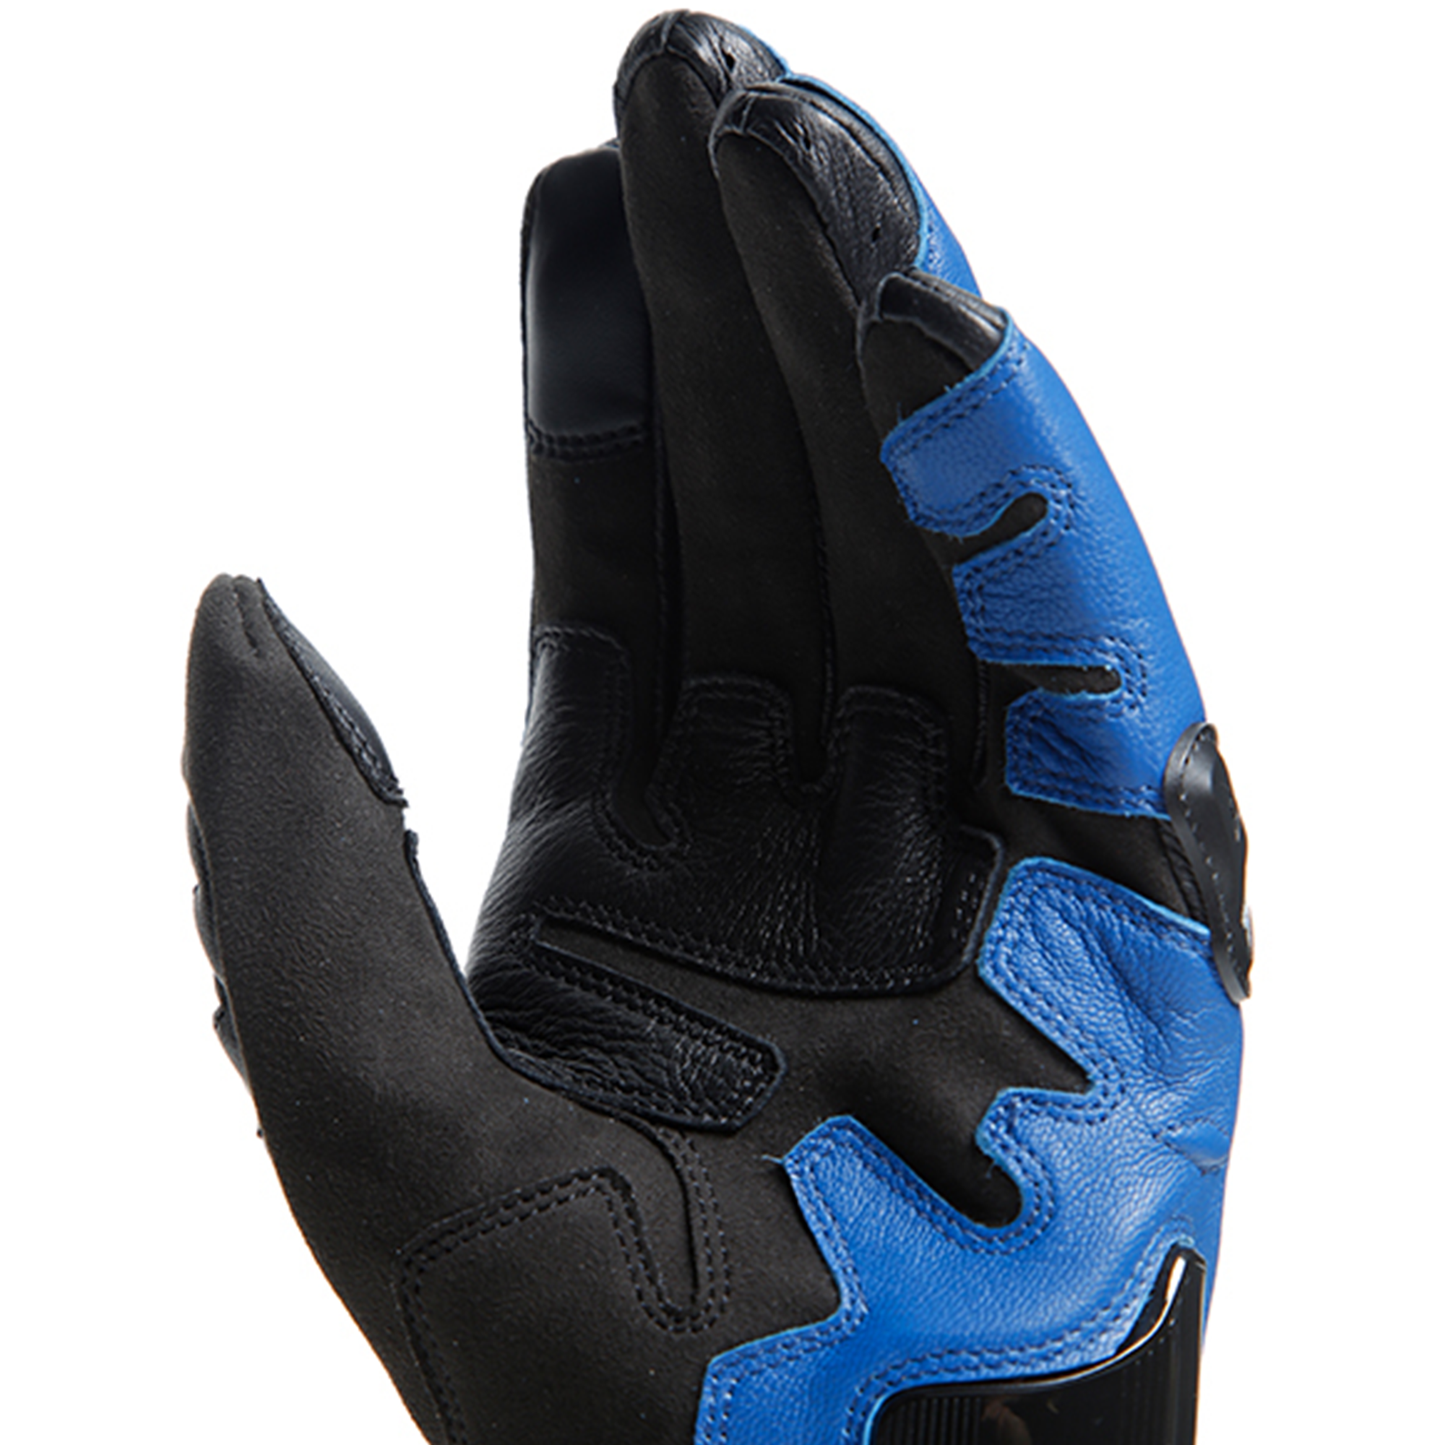 Dainese Carbon 4 Short Leather Gloves - Racing Blue/Black/Flo Yellow